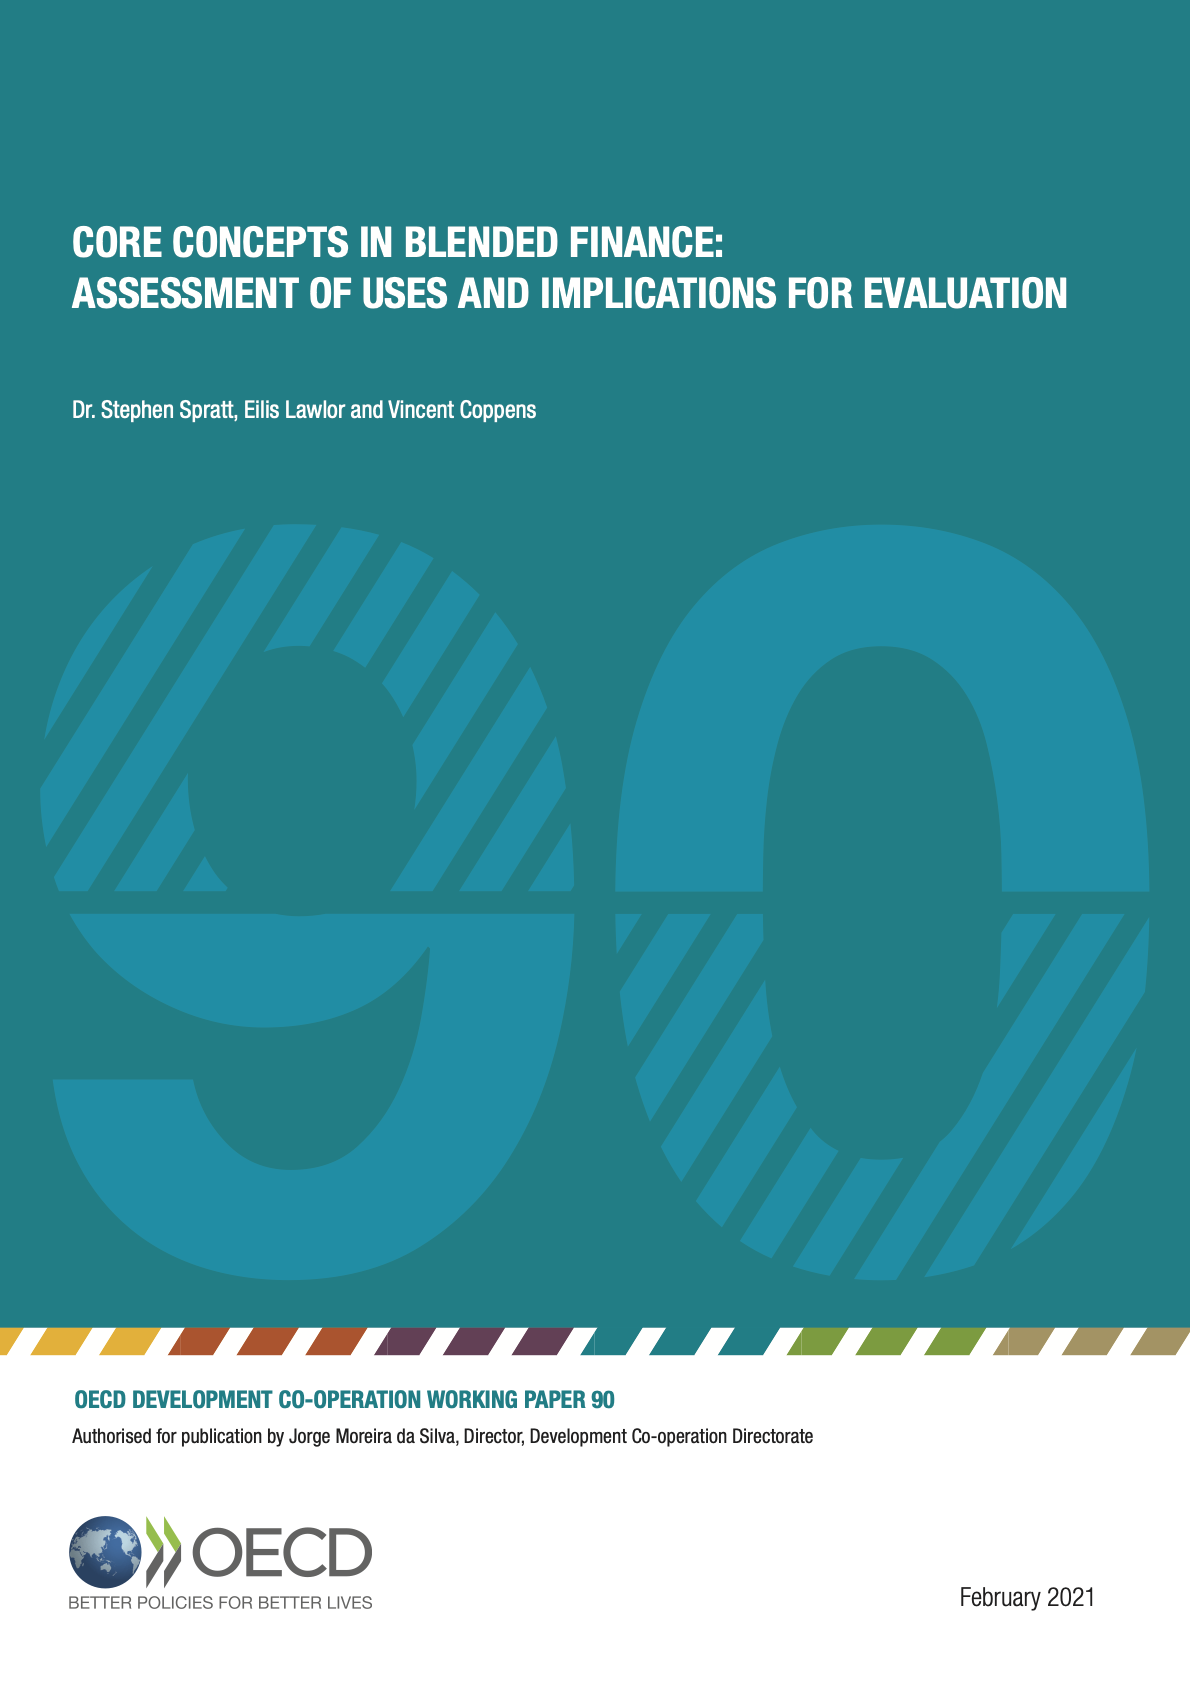 Core concepts in blended finance: Assessment of uses and implications for evaluation - Working paper